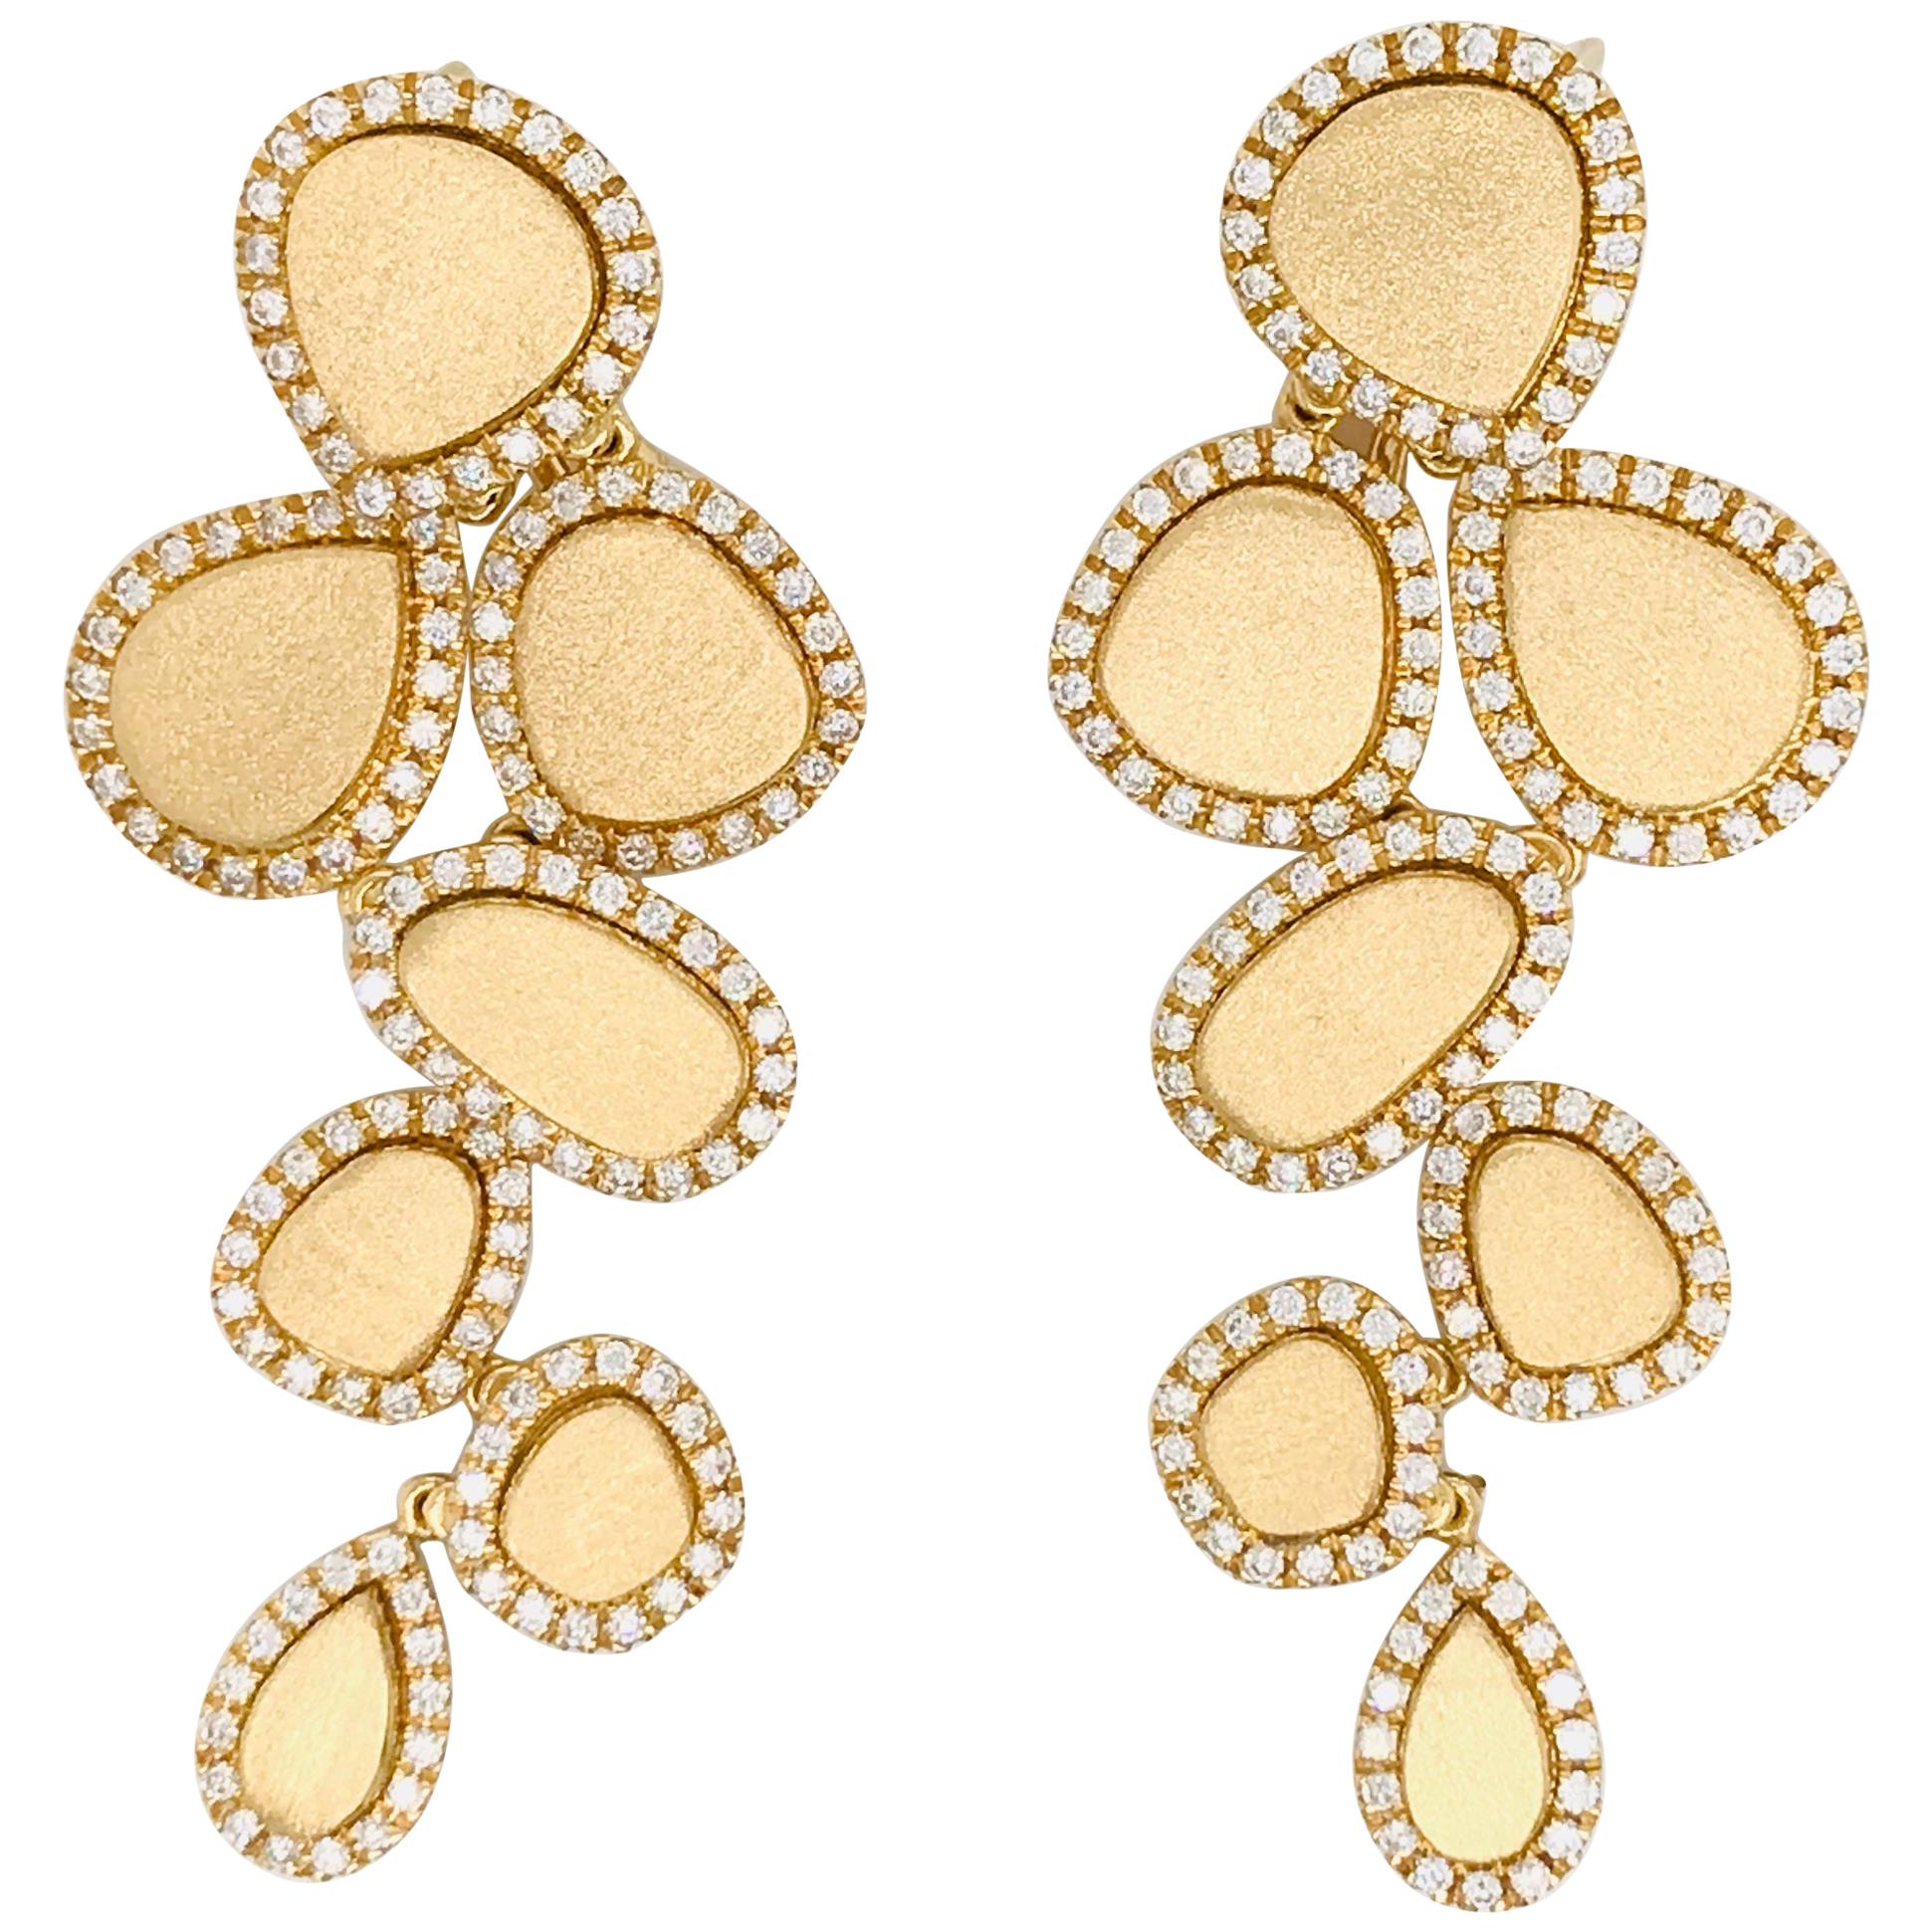 Diamonds and Brushed Yellow Gold 18 Karat Articulated Chandelier Earrings